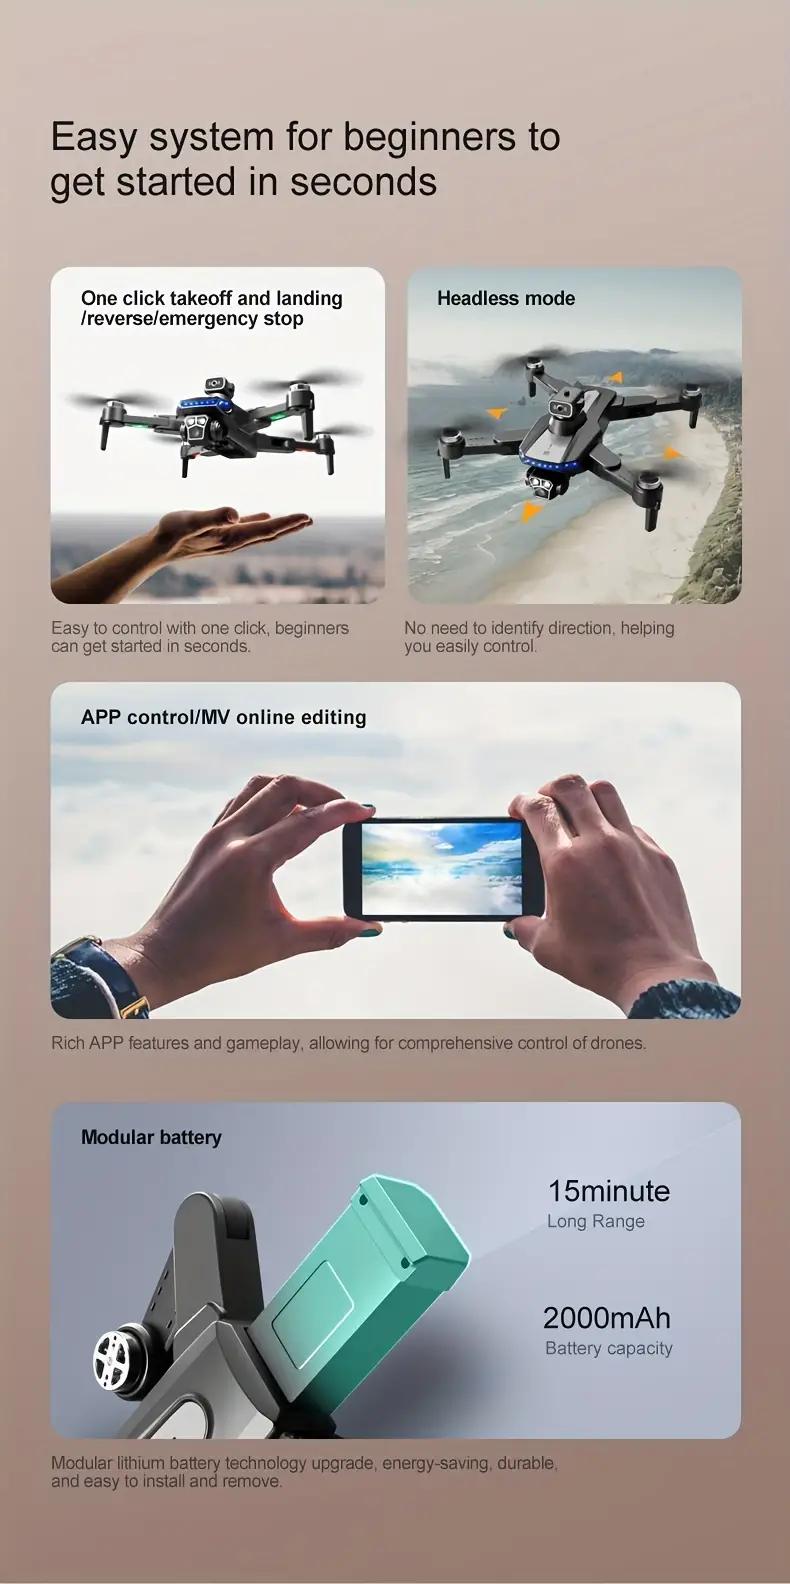 rg600 pro electronically controlled dual camera high definition aerial photography folding drone optical flow positioning intelligent obstacle avoidance face and gesture photo recognition details 16